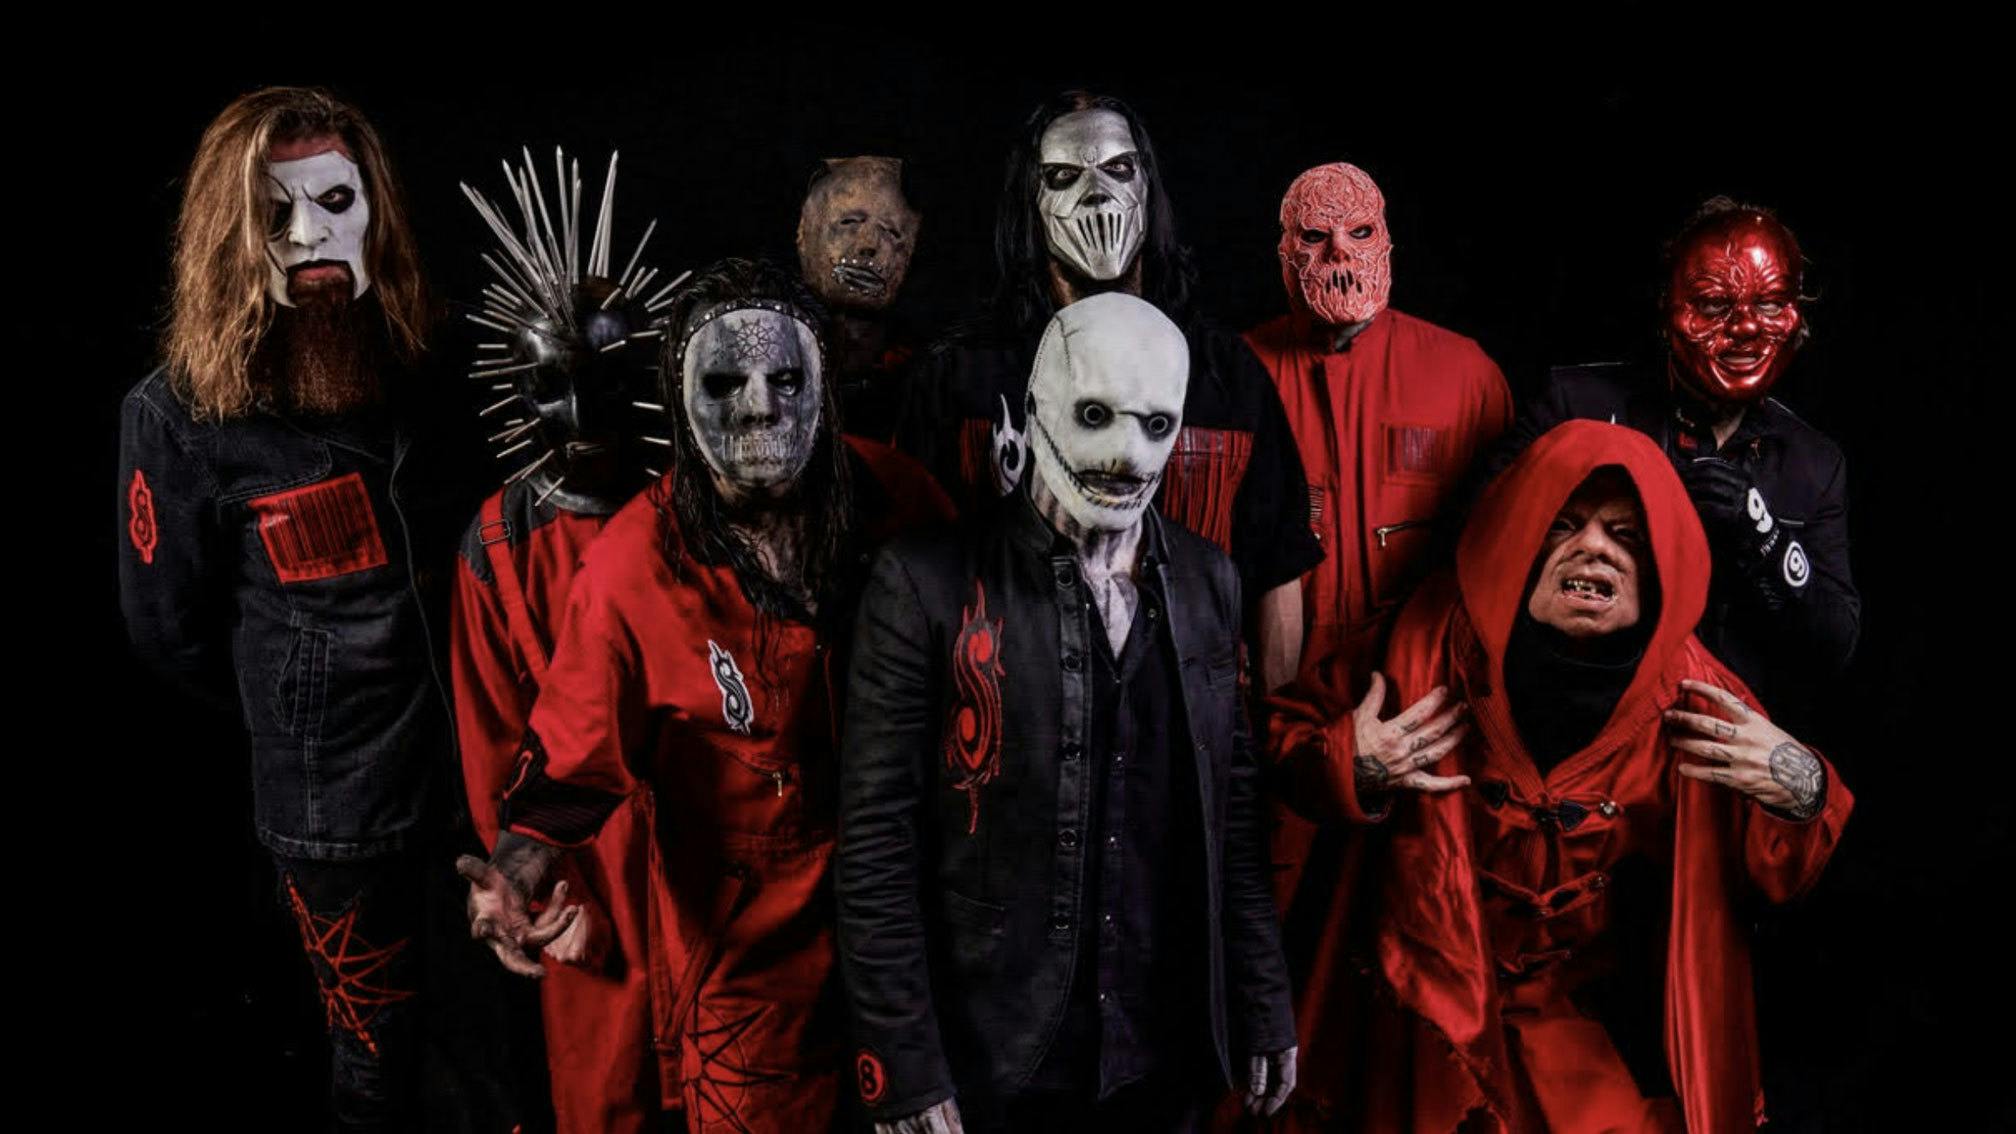 Corey Taylor on Slipknot’s upcoming tour: “You’re gonna see some songs that haven’t been played live in a very long time”